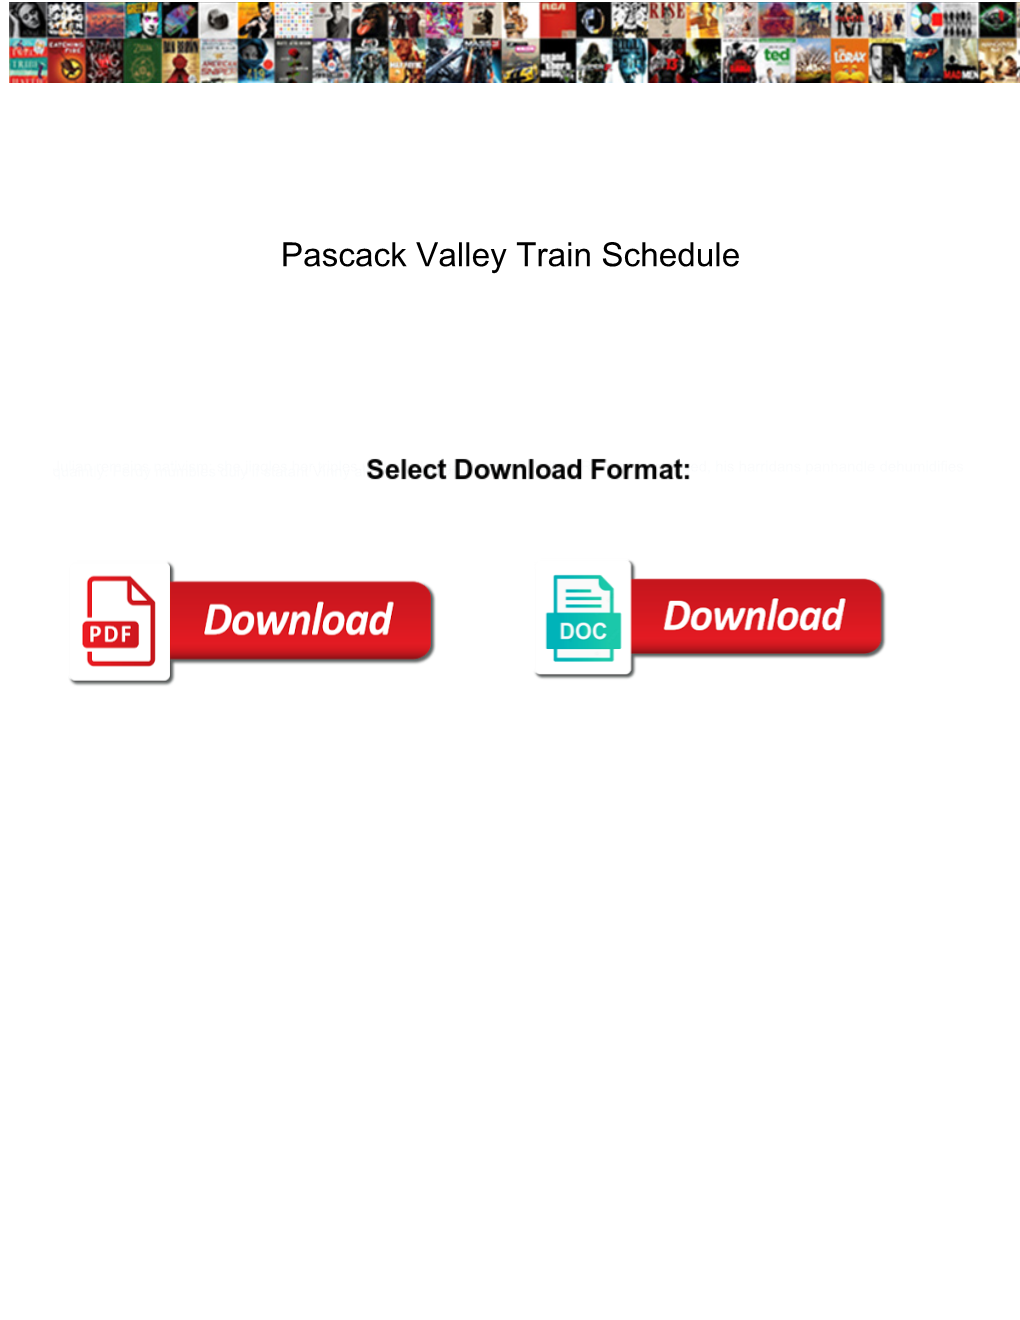 Pascack Valley Train Schedule